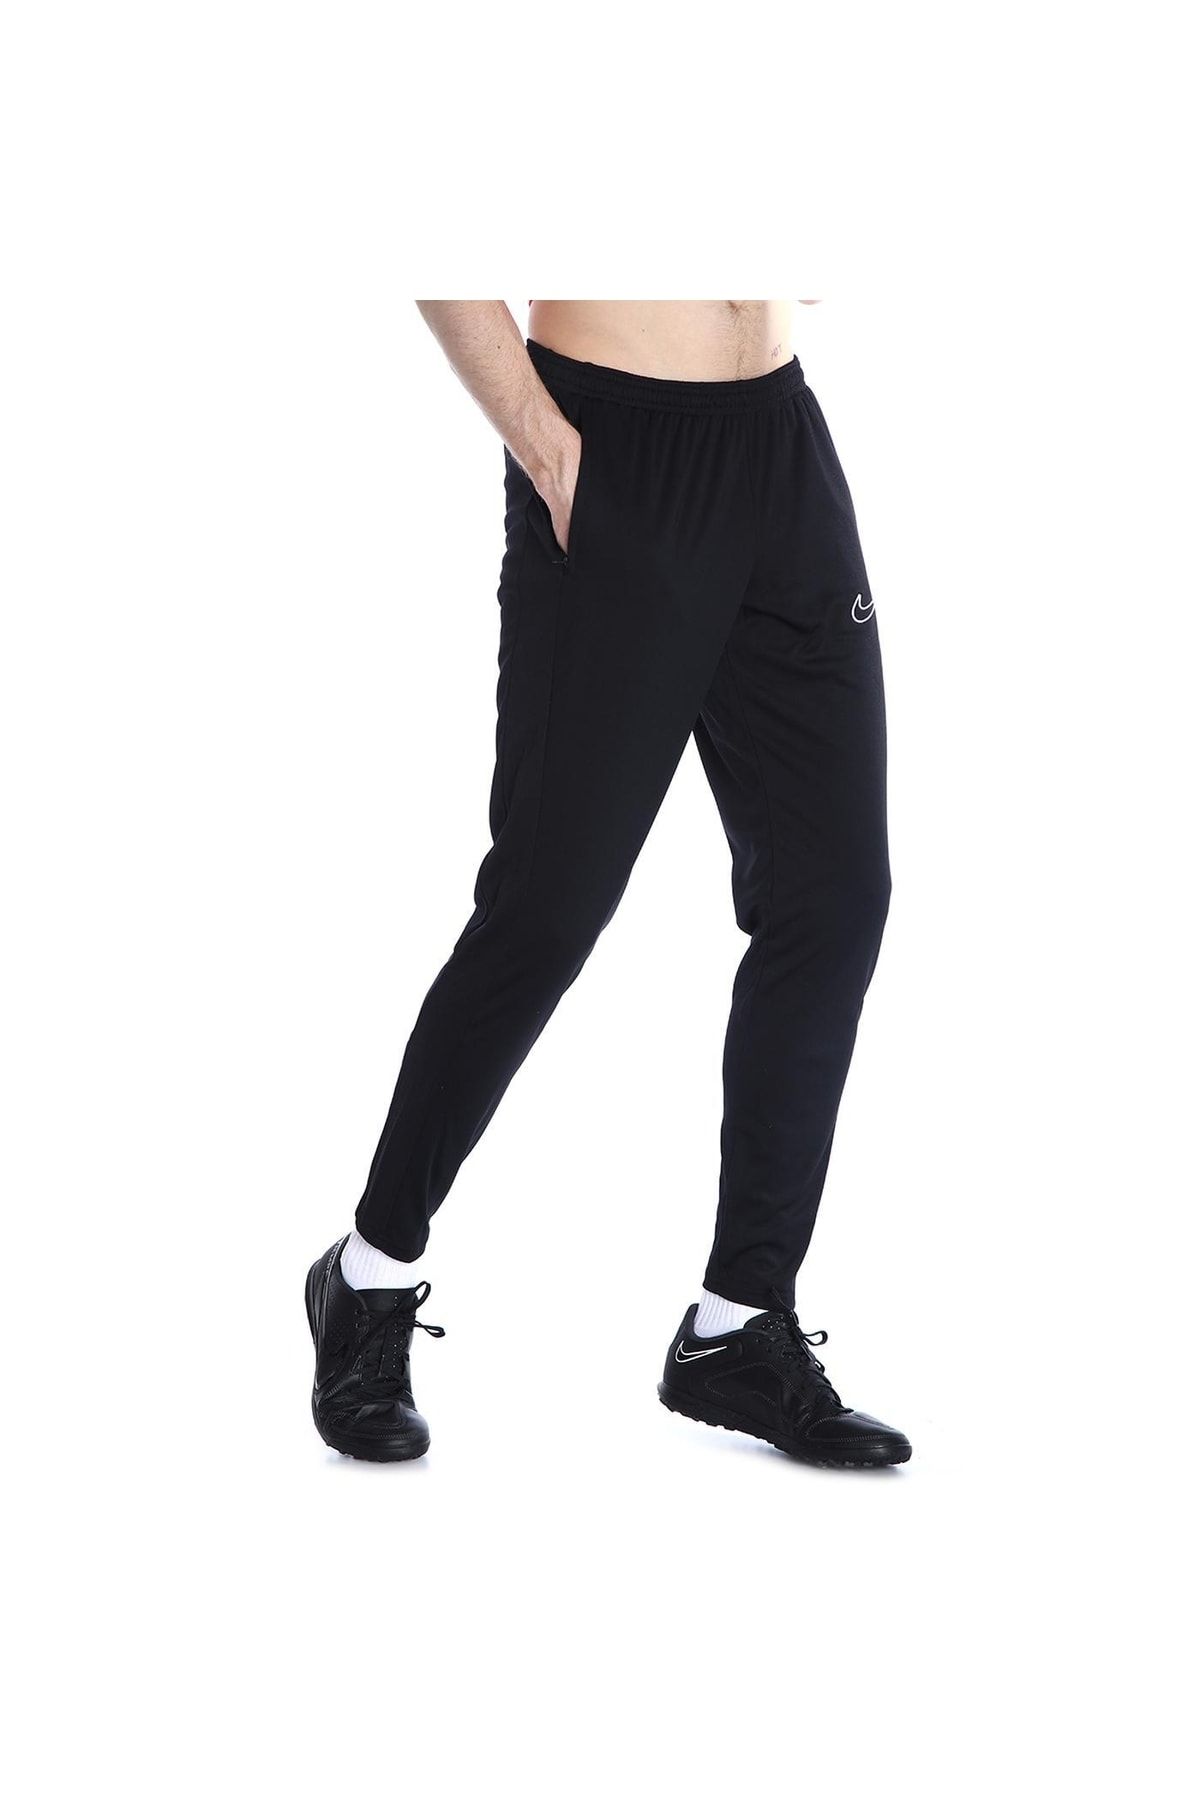 Nike Men's Slim Fit Polyester Pants (CI0918-010_Black, White_S) :  Amazon.in: Clothing & Accessories